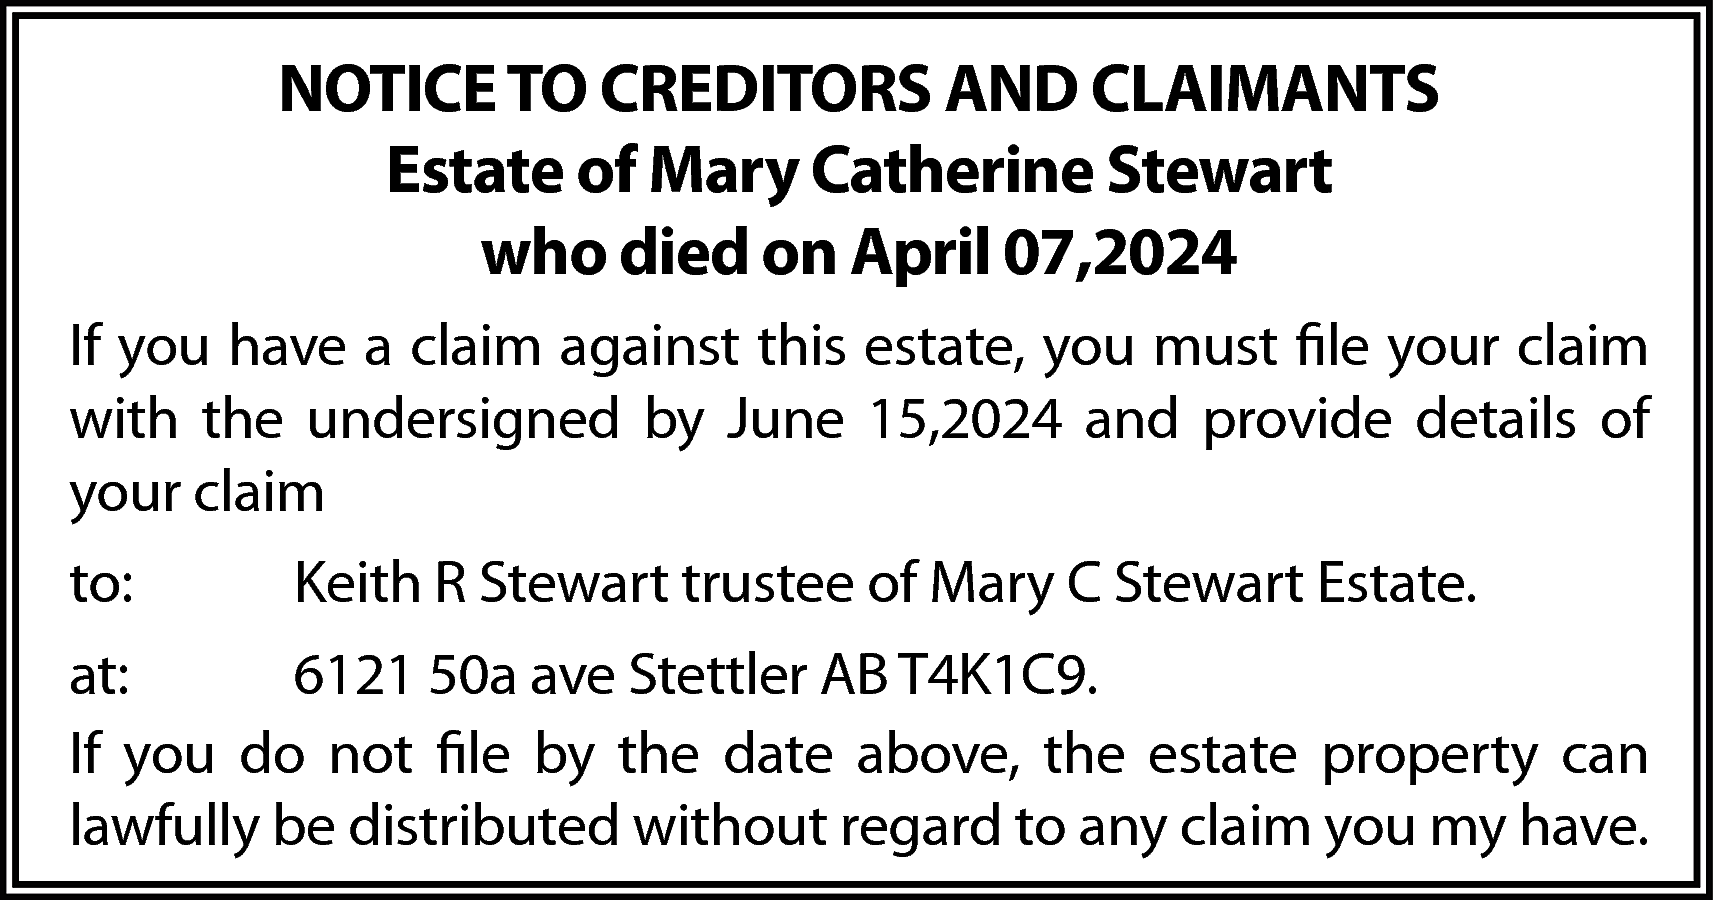 NOTICE TO CREDITORS AND CLAIMANTS  NOTICE TO CREDITORS AND CLAIMANTS  Estate of Mary Catherine Stewart  who died on April 07,2024  If you have a claim against this estate, you must file your claim  with the undersigned by June 15,2024 and provide details of  your claim  to:    Keith R Stewart trustee of Mary C Stewart Estate.    at:  6121 50a ave Stettler AB T4K1C9.  If you do not file by the date above, the estate property can  lawfully be distributed without regard to any claim you my have.    